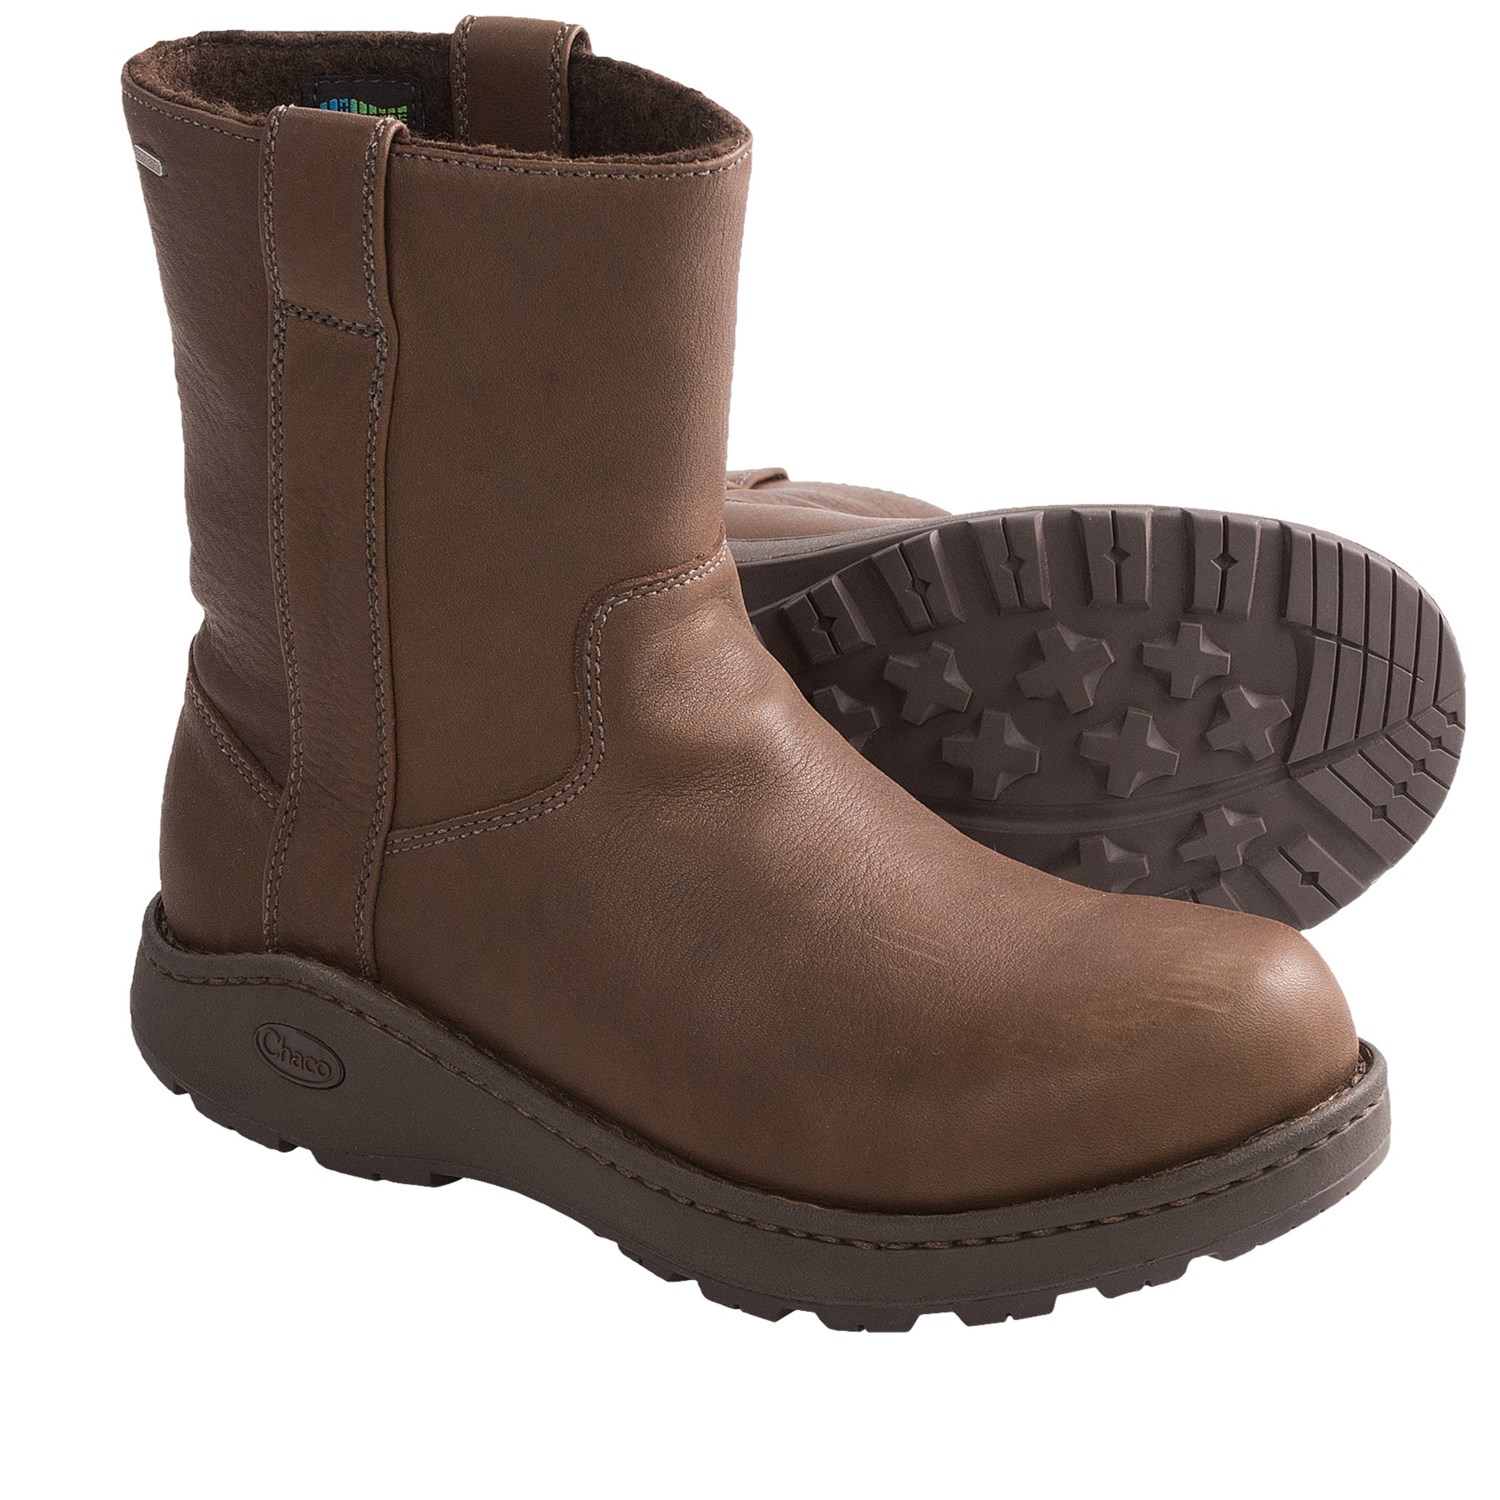 Mens Slip On Snow Boots - Yu Boots